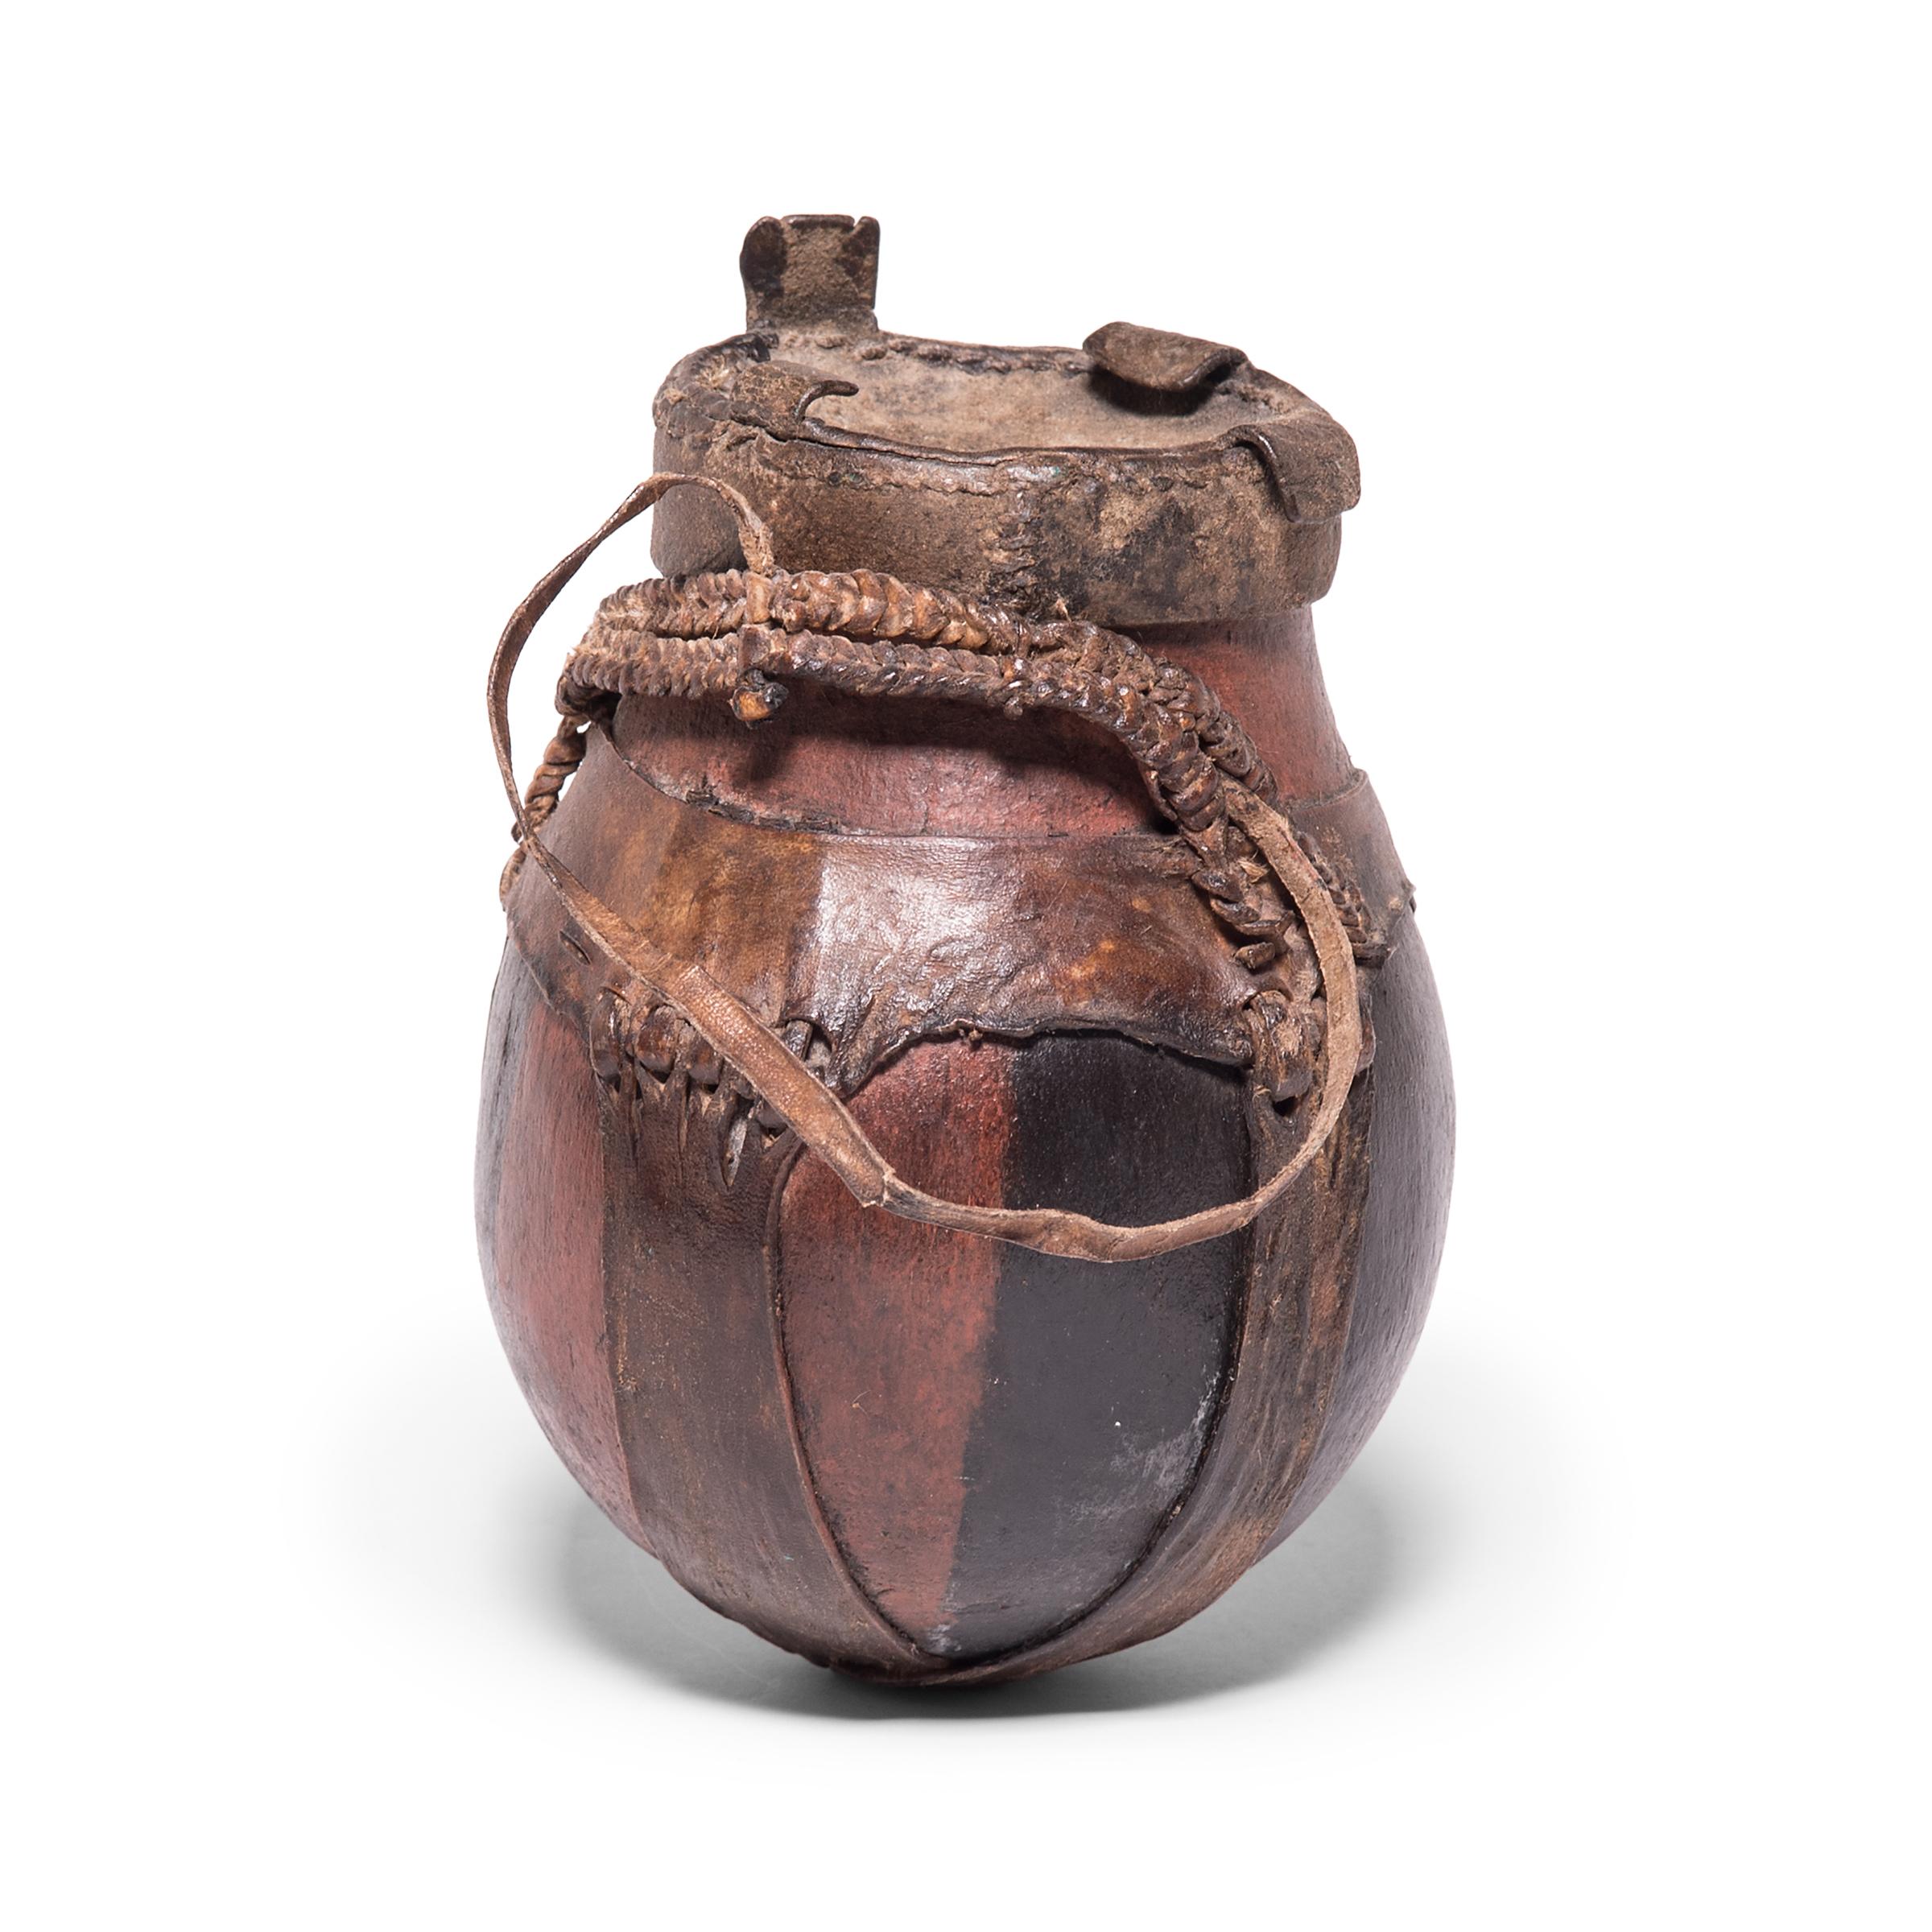 The Borana Oromo people of southern Ethiopia and northern Kenya are historically a cattle-keeping culture, and each household keeps a number of traditional vessels for storing and churning cow's milk. This rounded vessel would have been used within